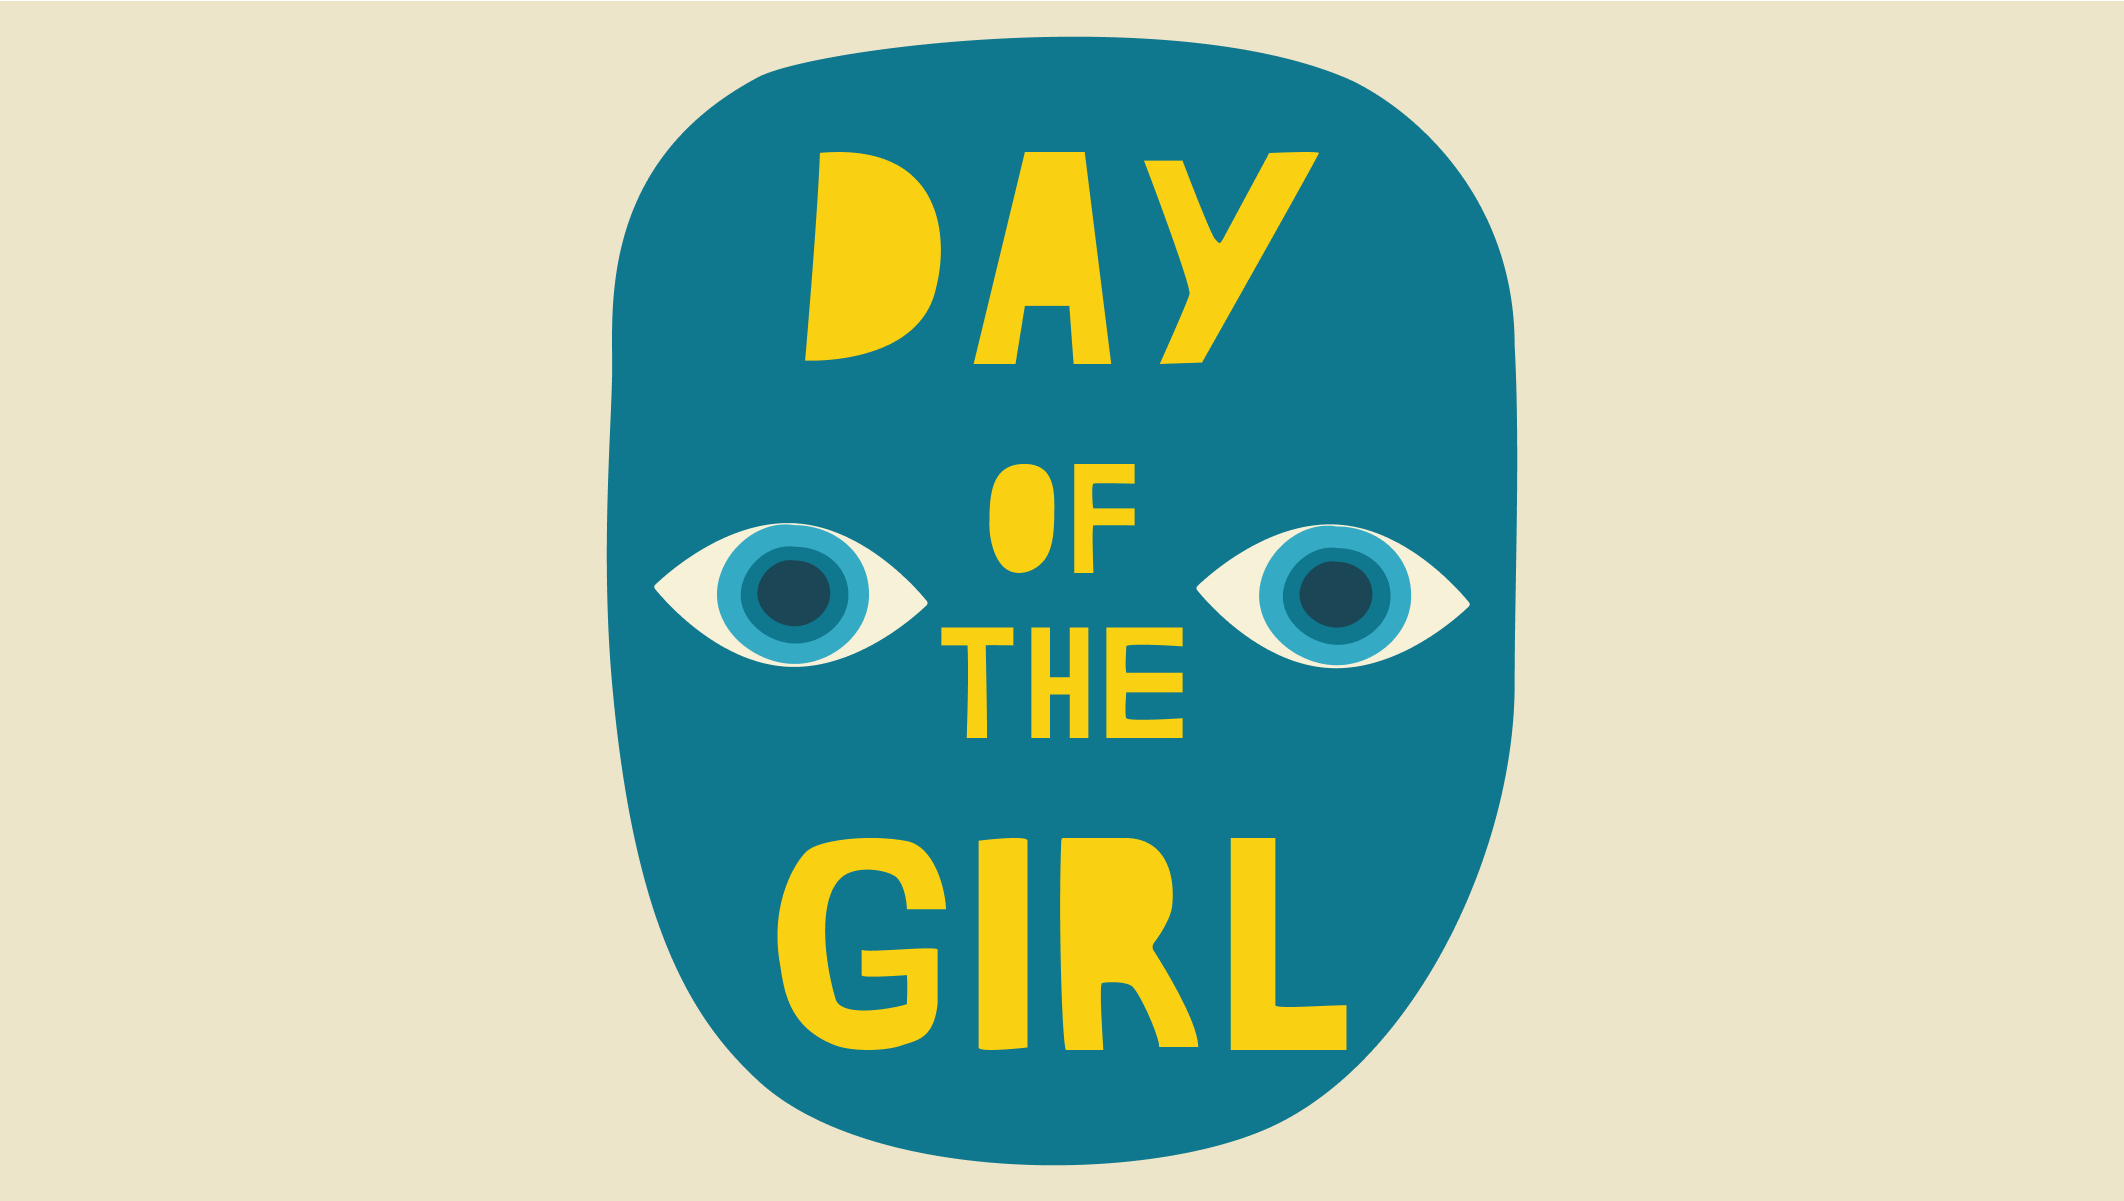 Day of the girl graphic